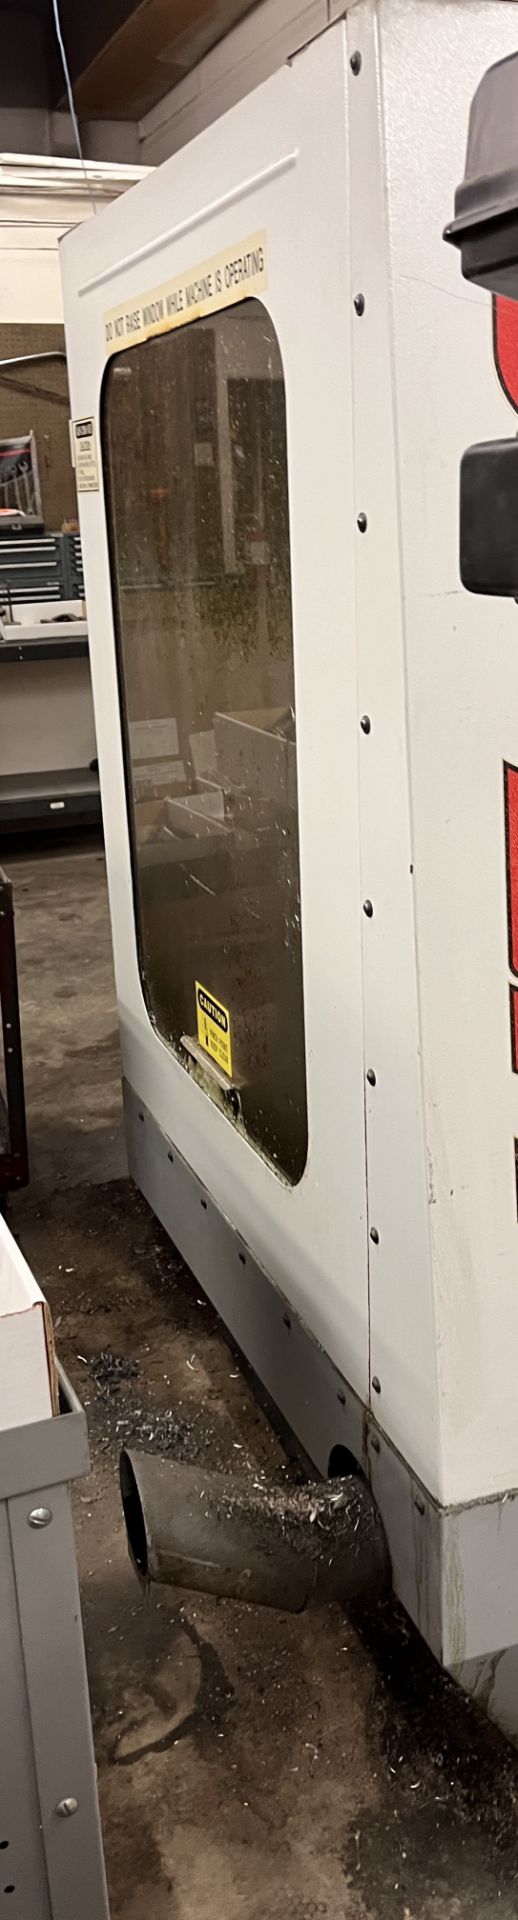 1996 Haas VFO CNC Vertical Machining Center - Image 8 of 13